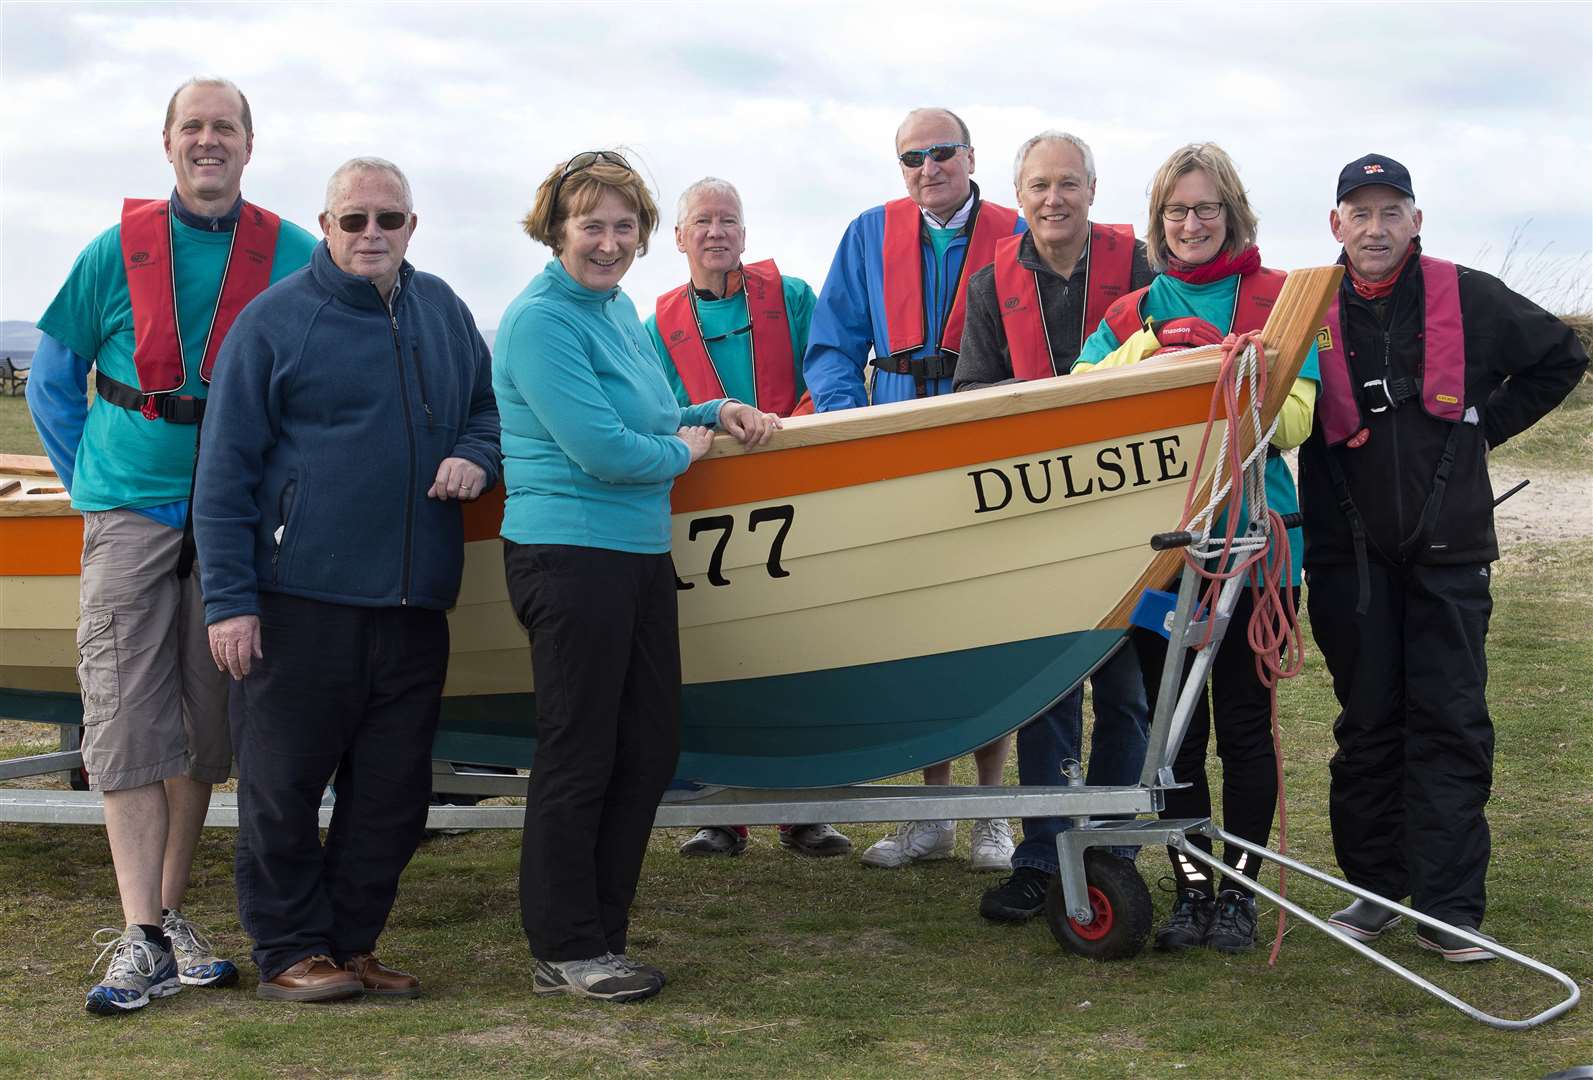 Nairn Coastal Rowing Club will be part of a great rowing spectacle in the town this Saturday.